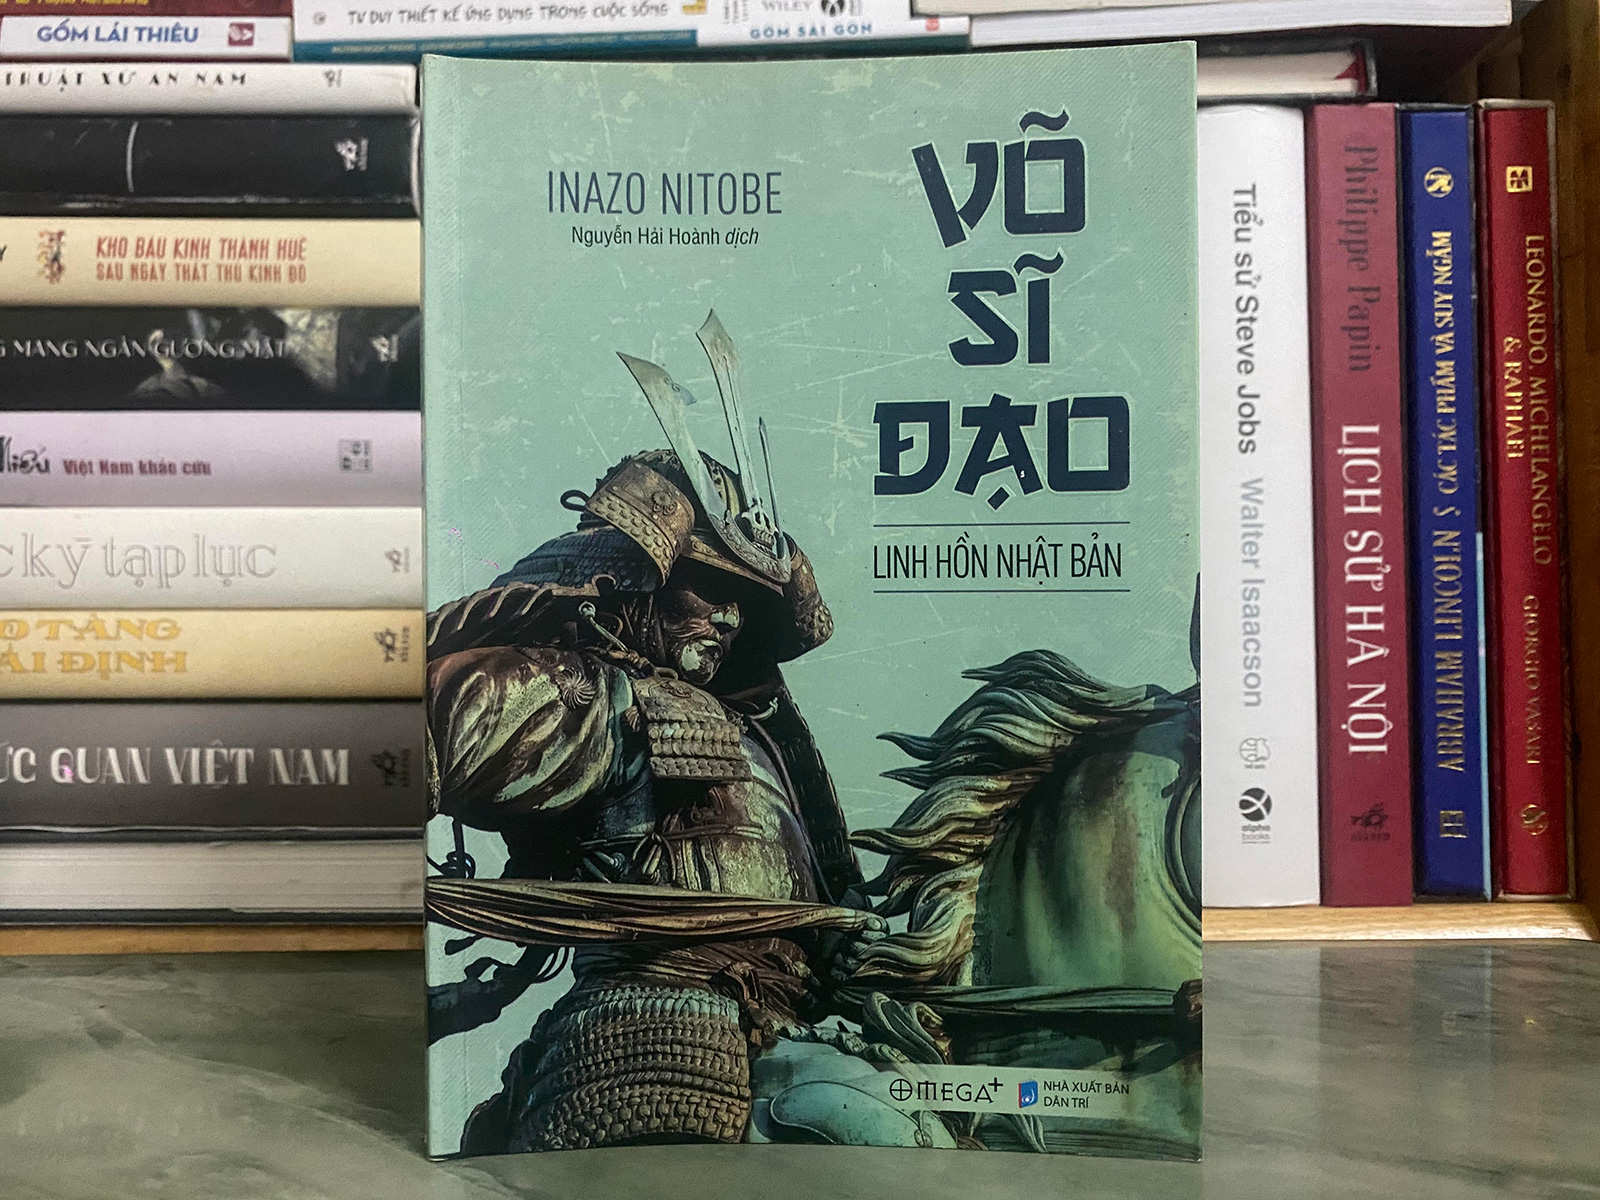 Vo si dao anh 1